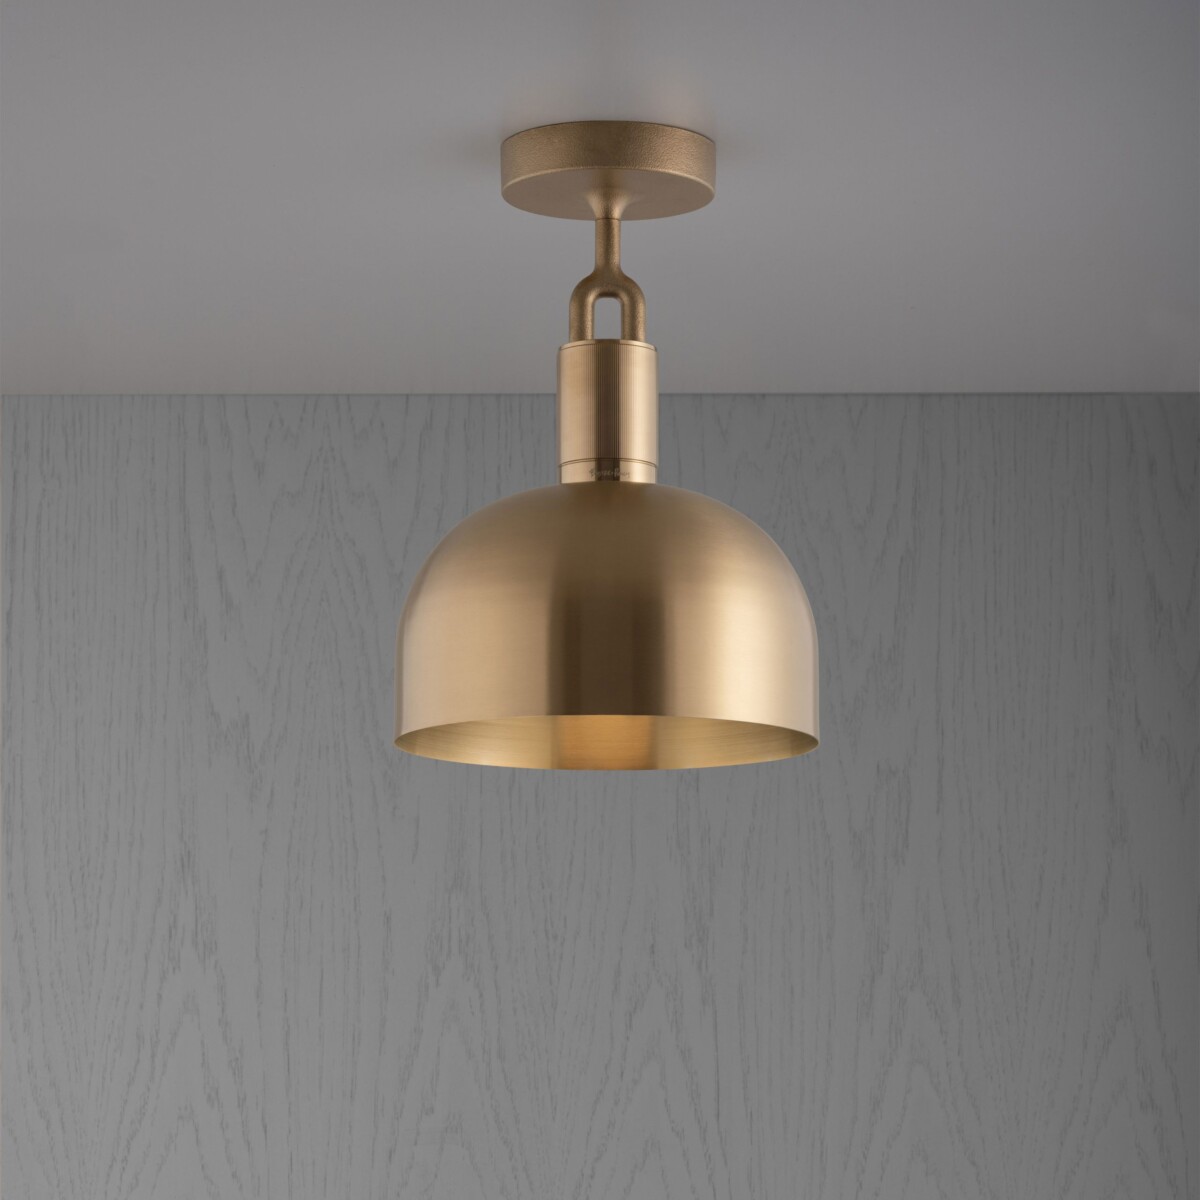 Forked_lighting_Ceiling_Brass_Medium_Shade_Web-scaled